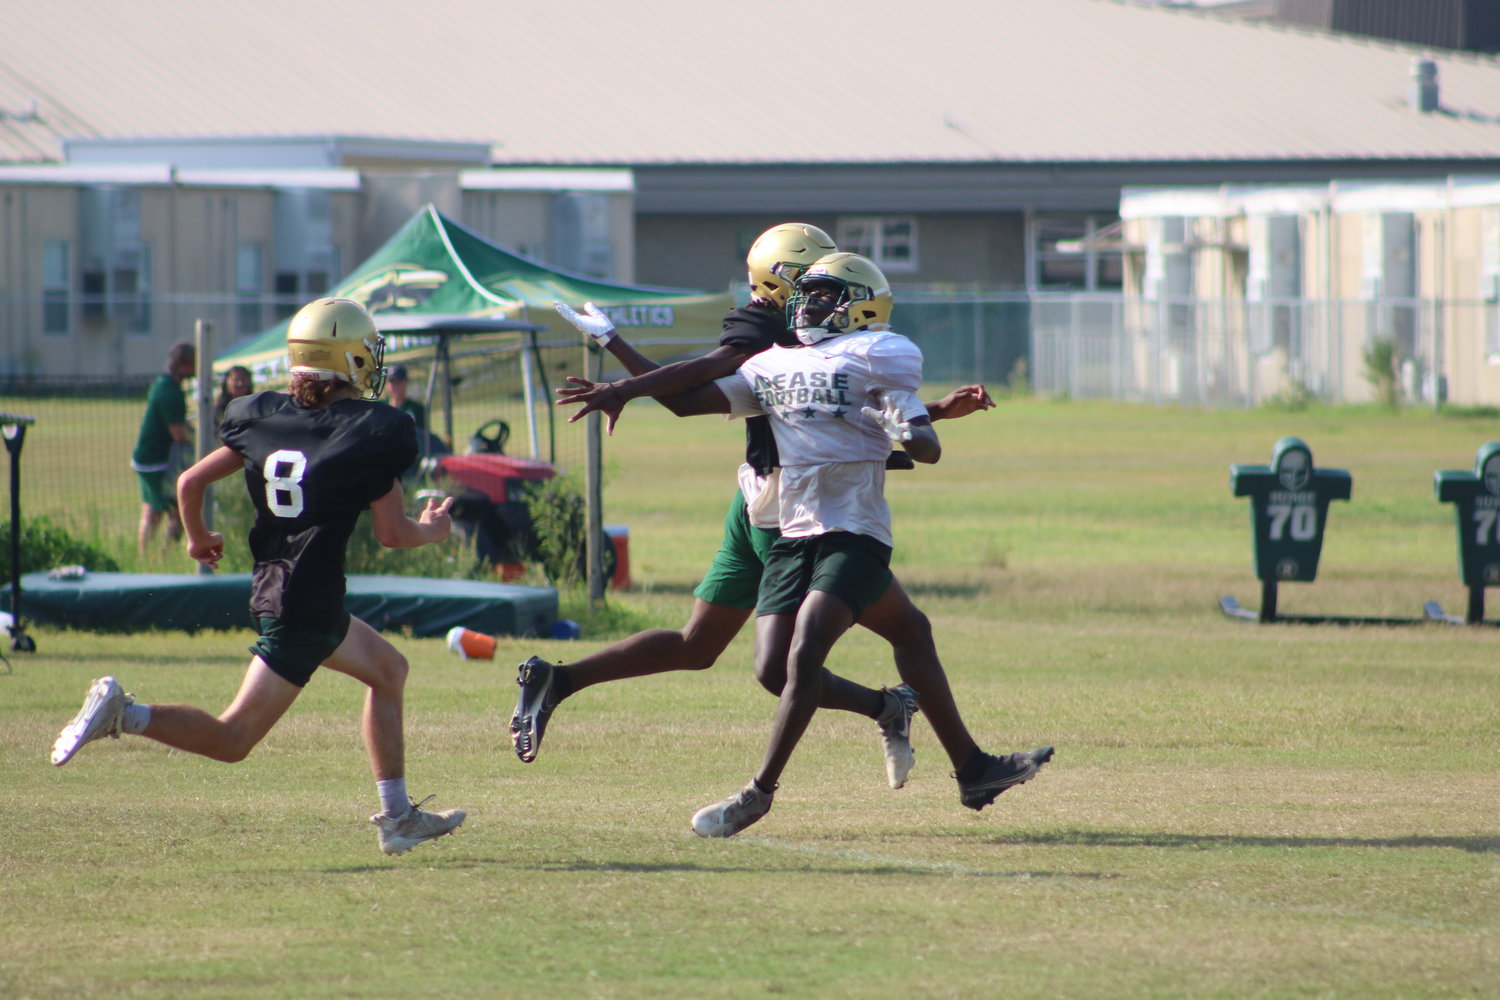 Nease’s defense has the potential to be strong against the pass and the run.